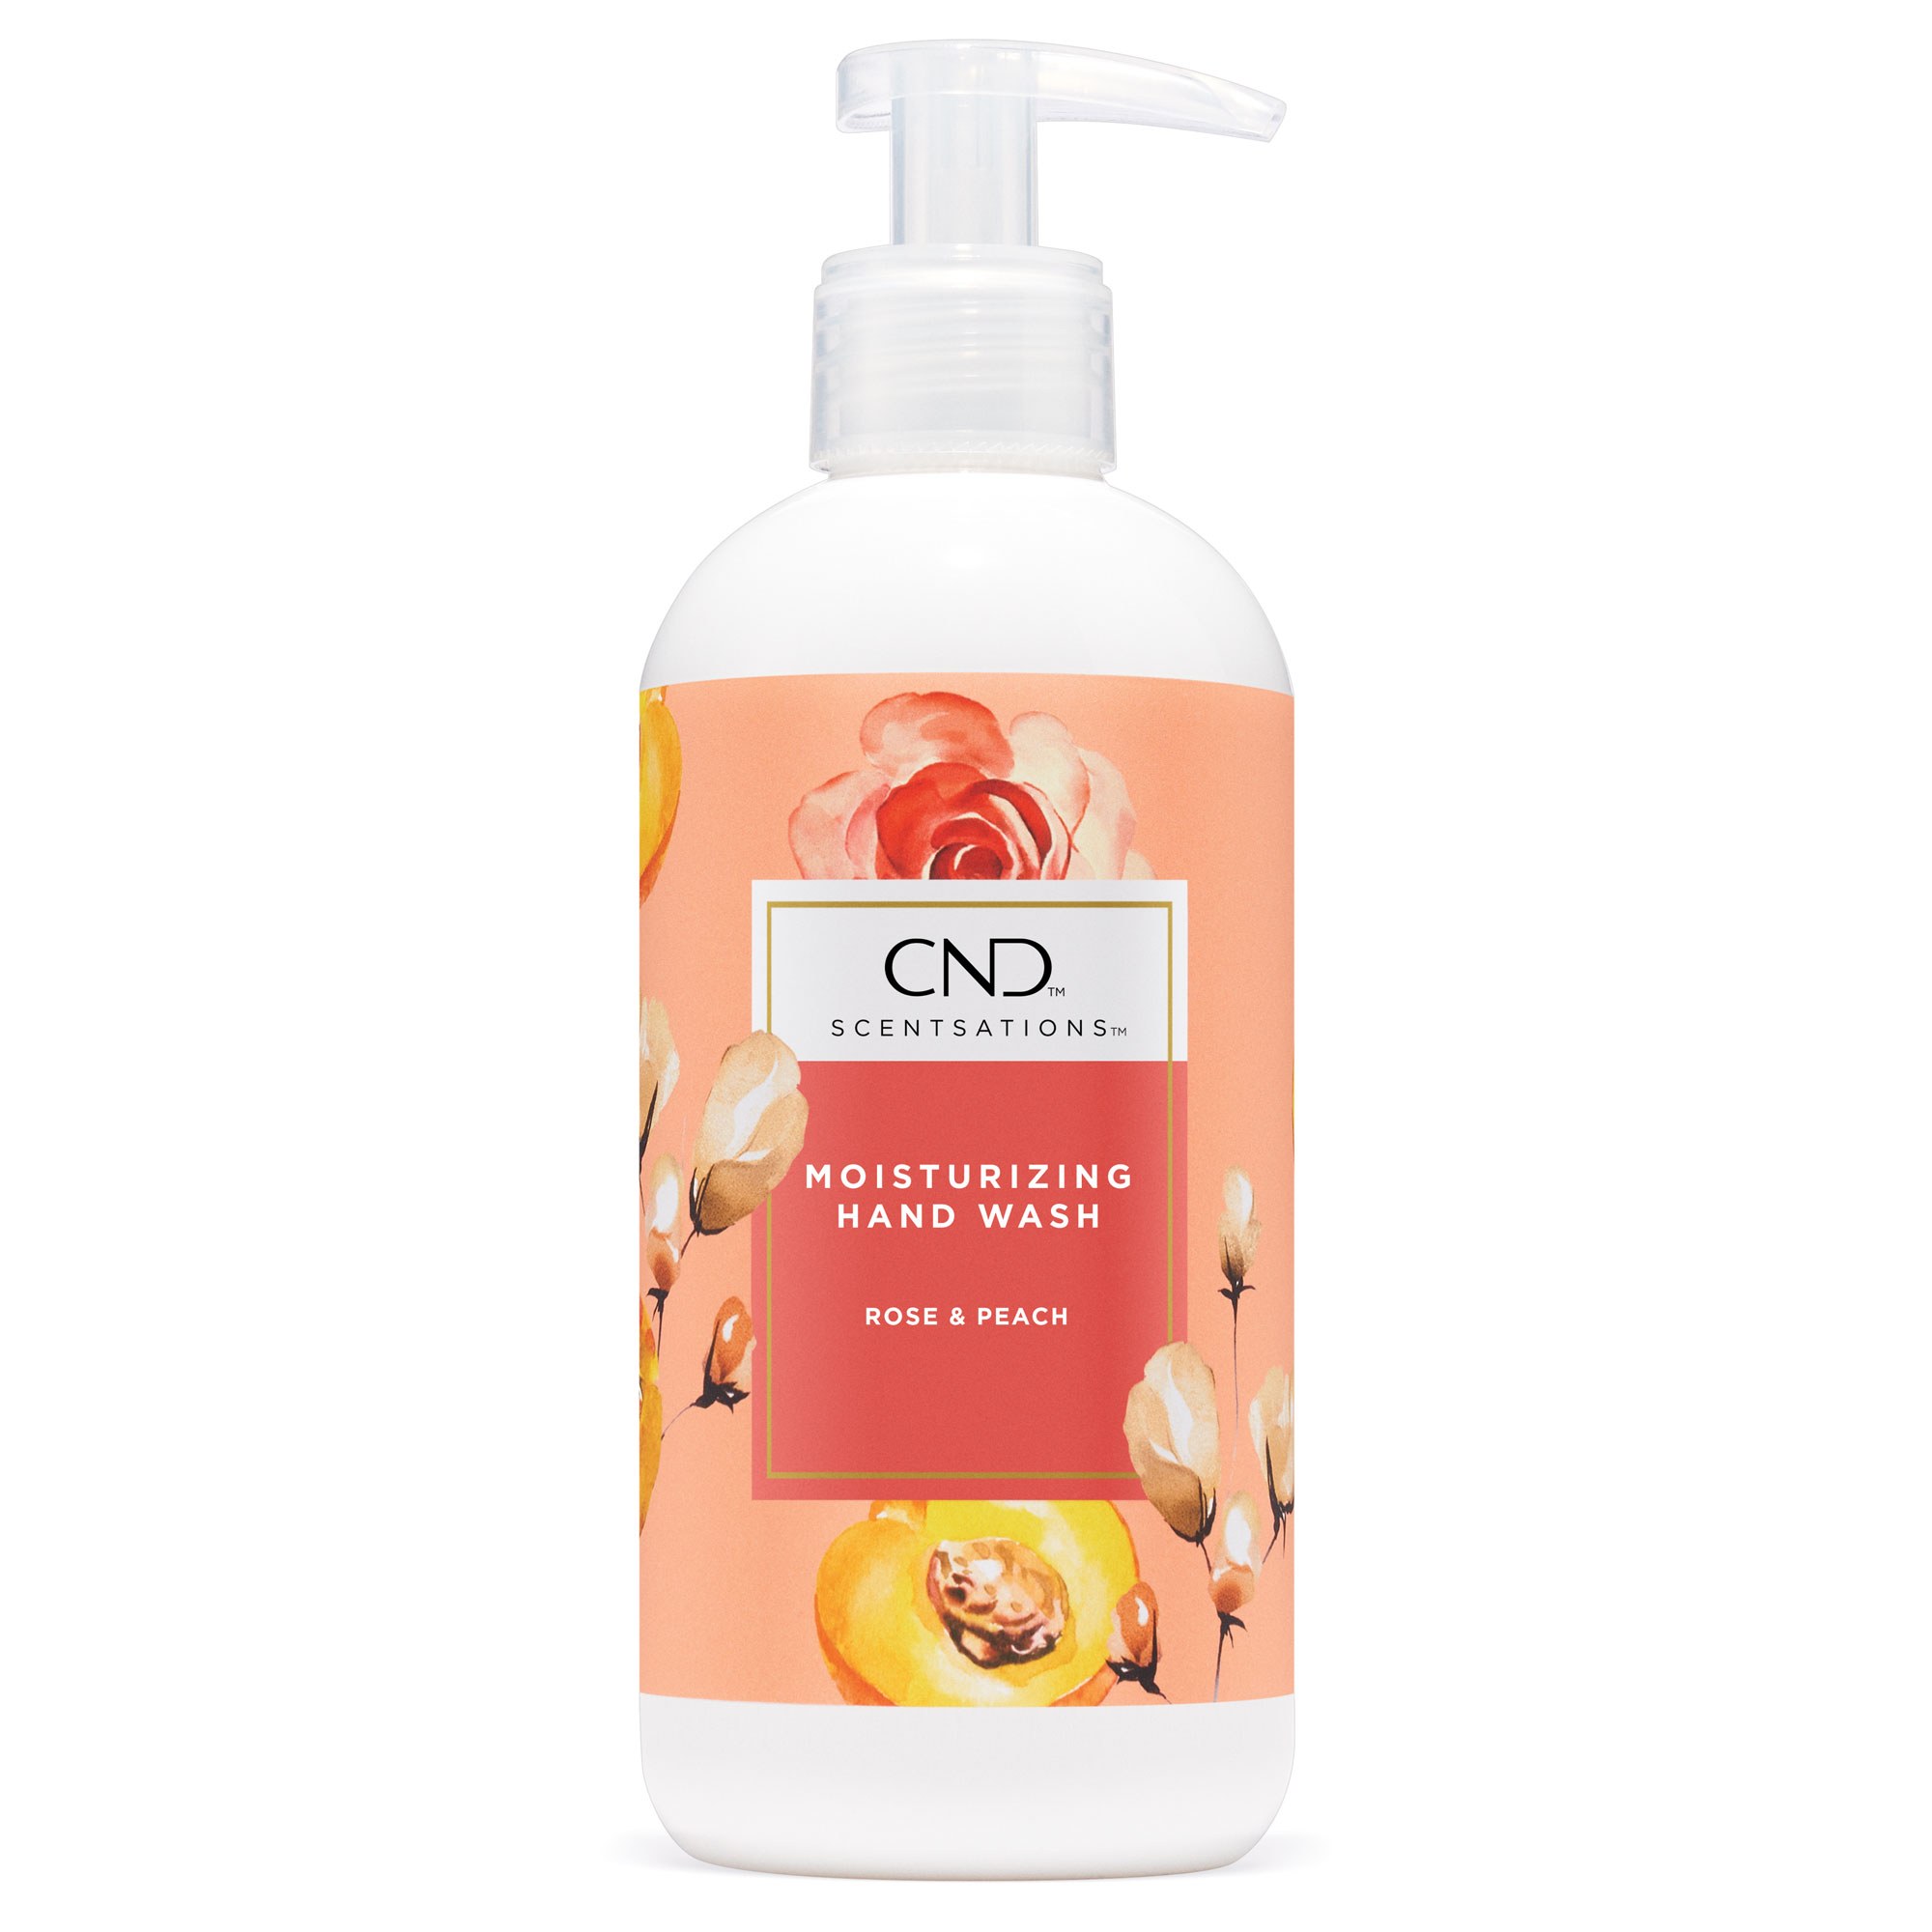 CND Scentsations - Rose & Peach Hand Wash